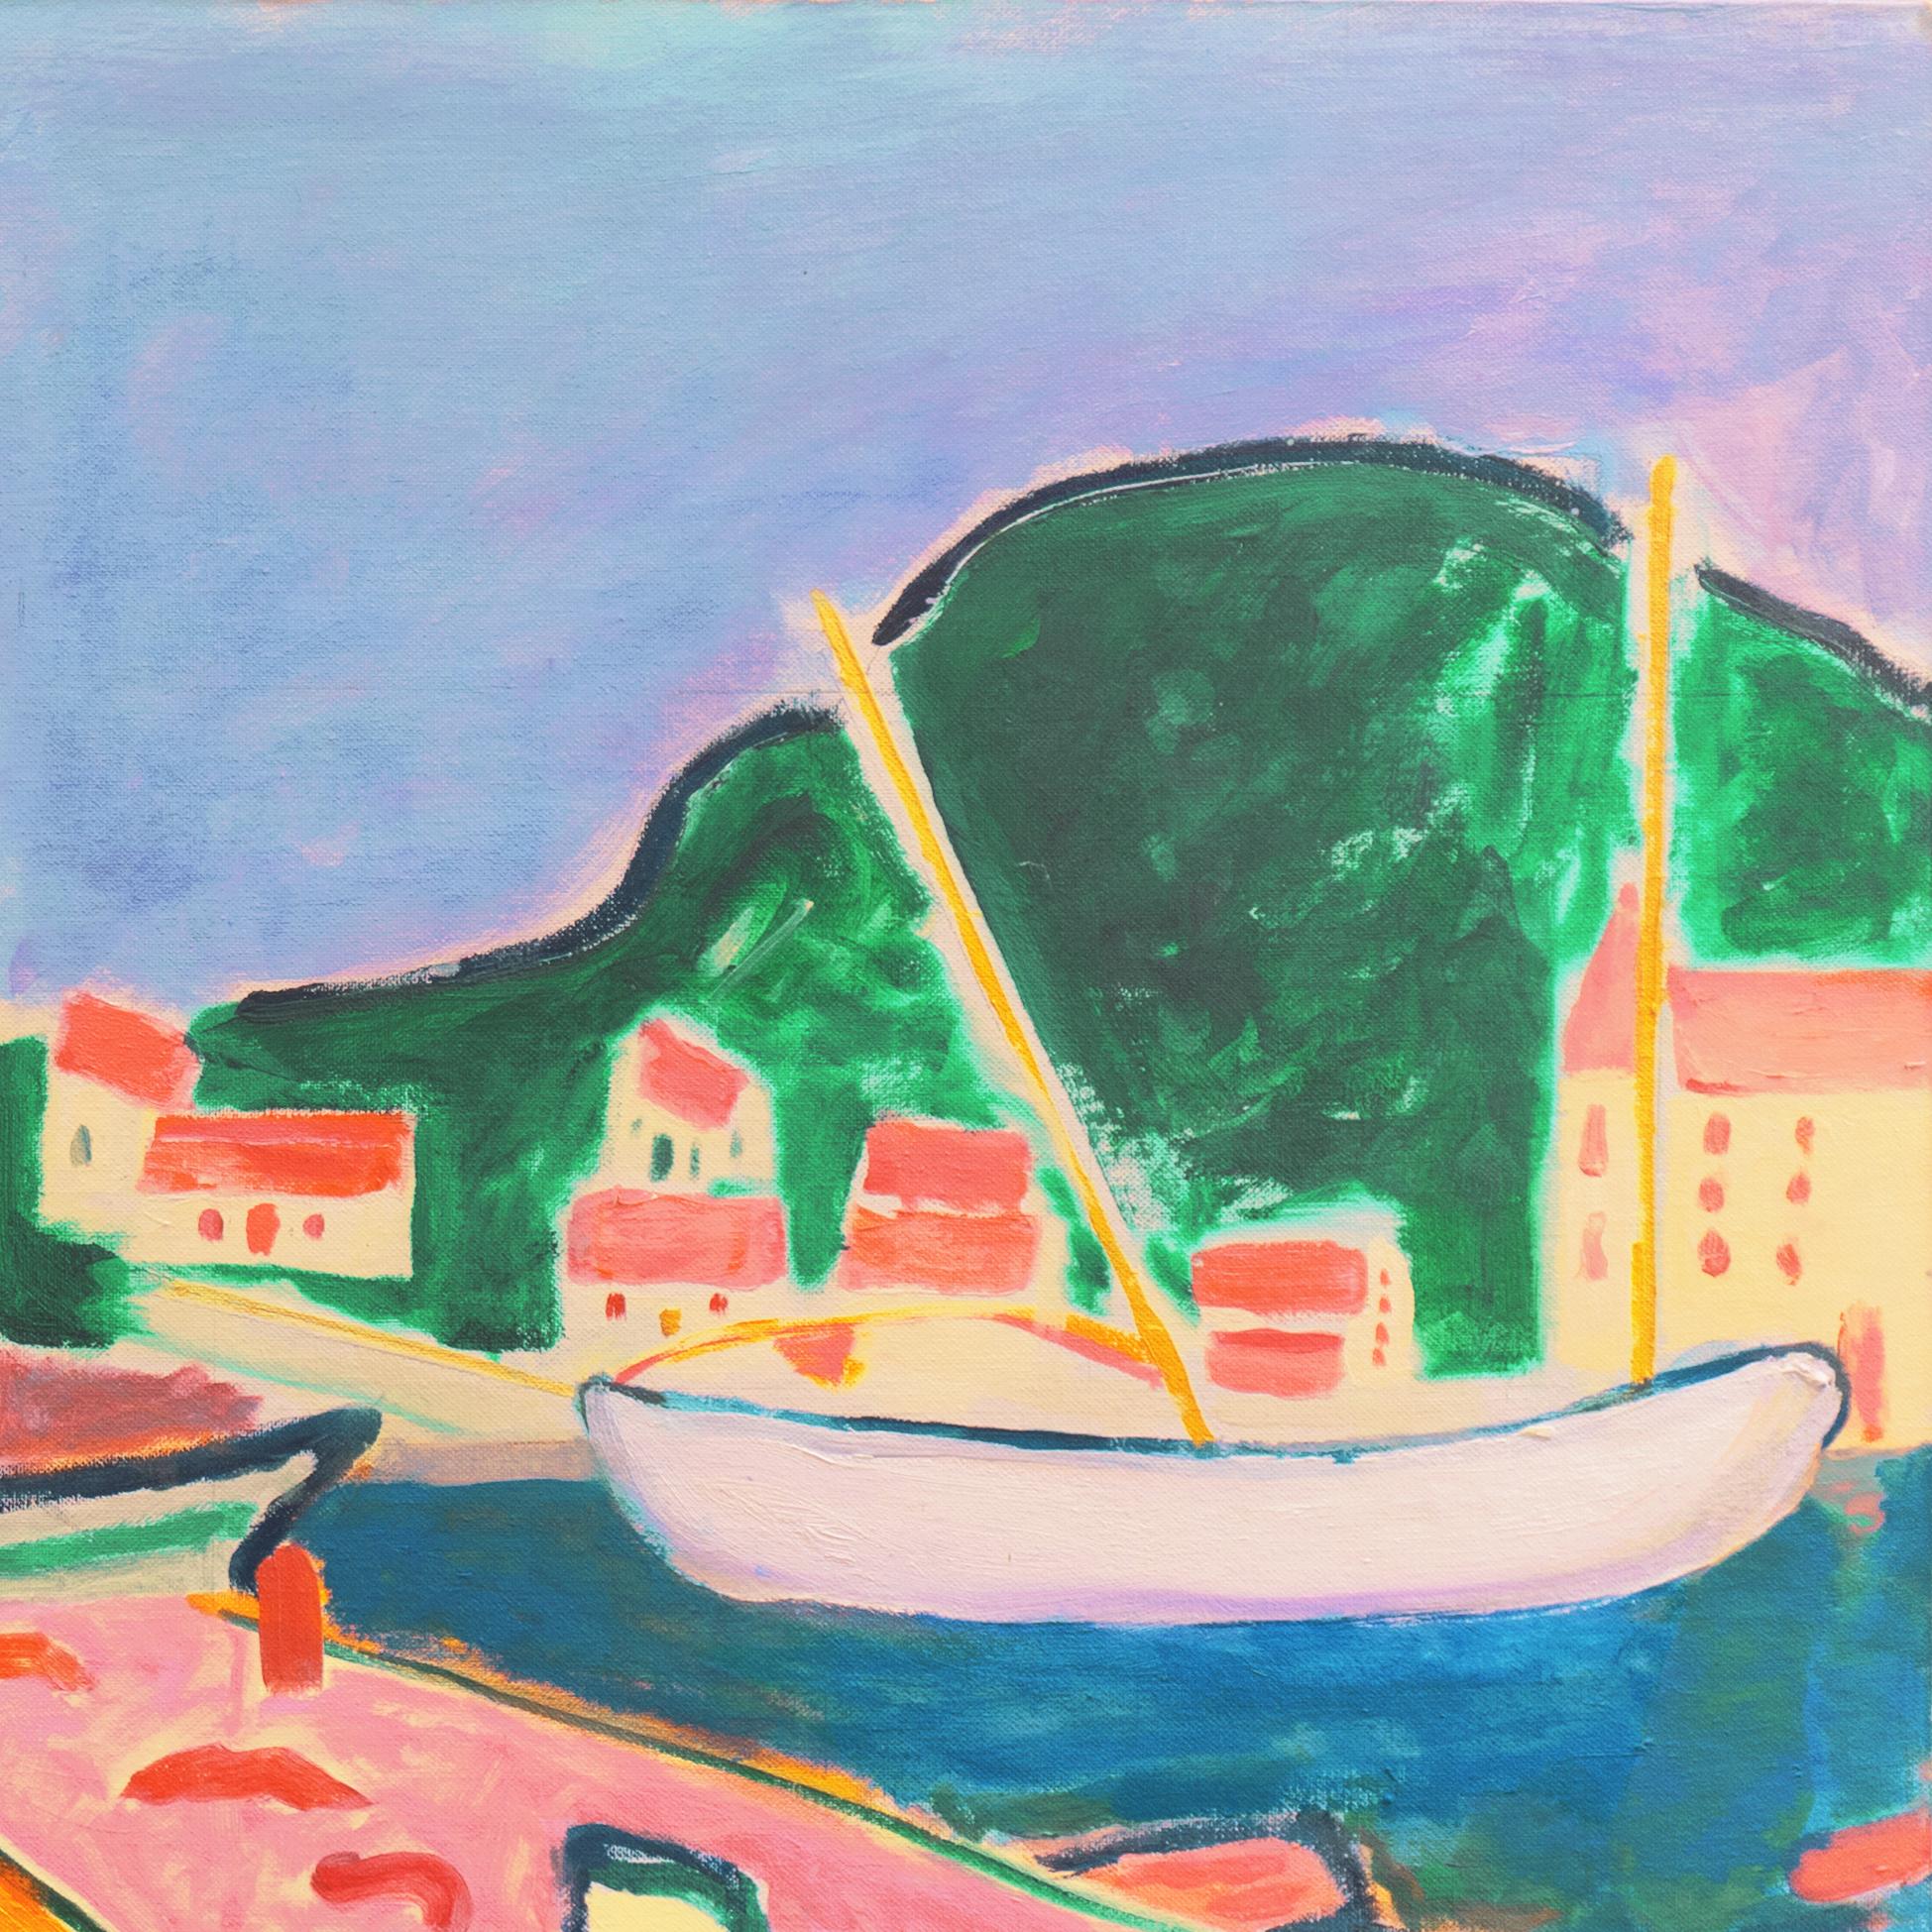 Signed verso, 'Ant McNaught', (American, born 1952), inscribed '(After Derain, 1905)', and with edition number '27' inscribed over limitation of '375', titled 'Port de Vendres' and dated 2020.
Framed dimensions: 34.5 x 3 x 40.25 inches. 

A